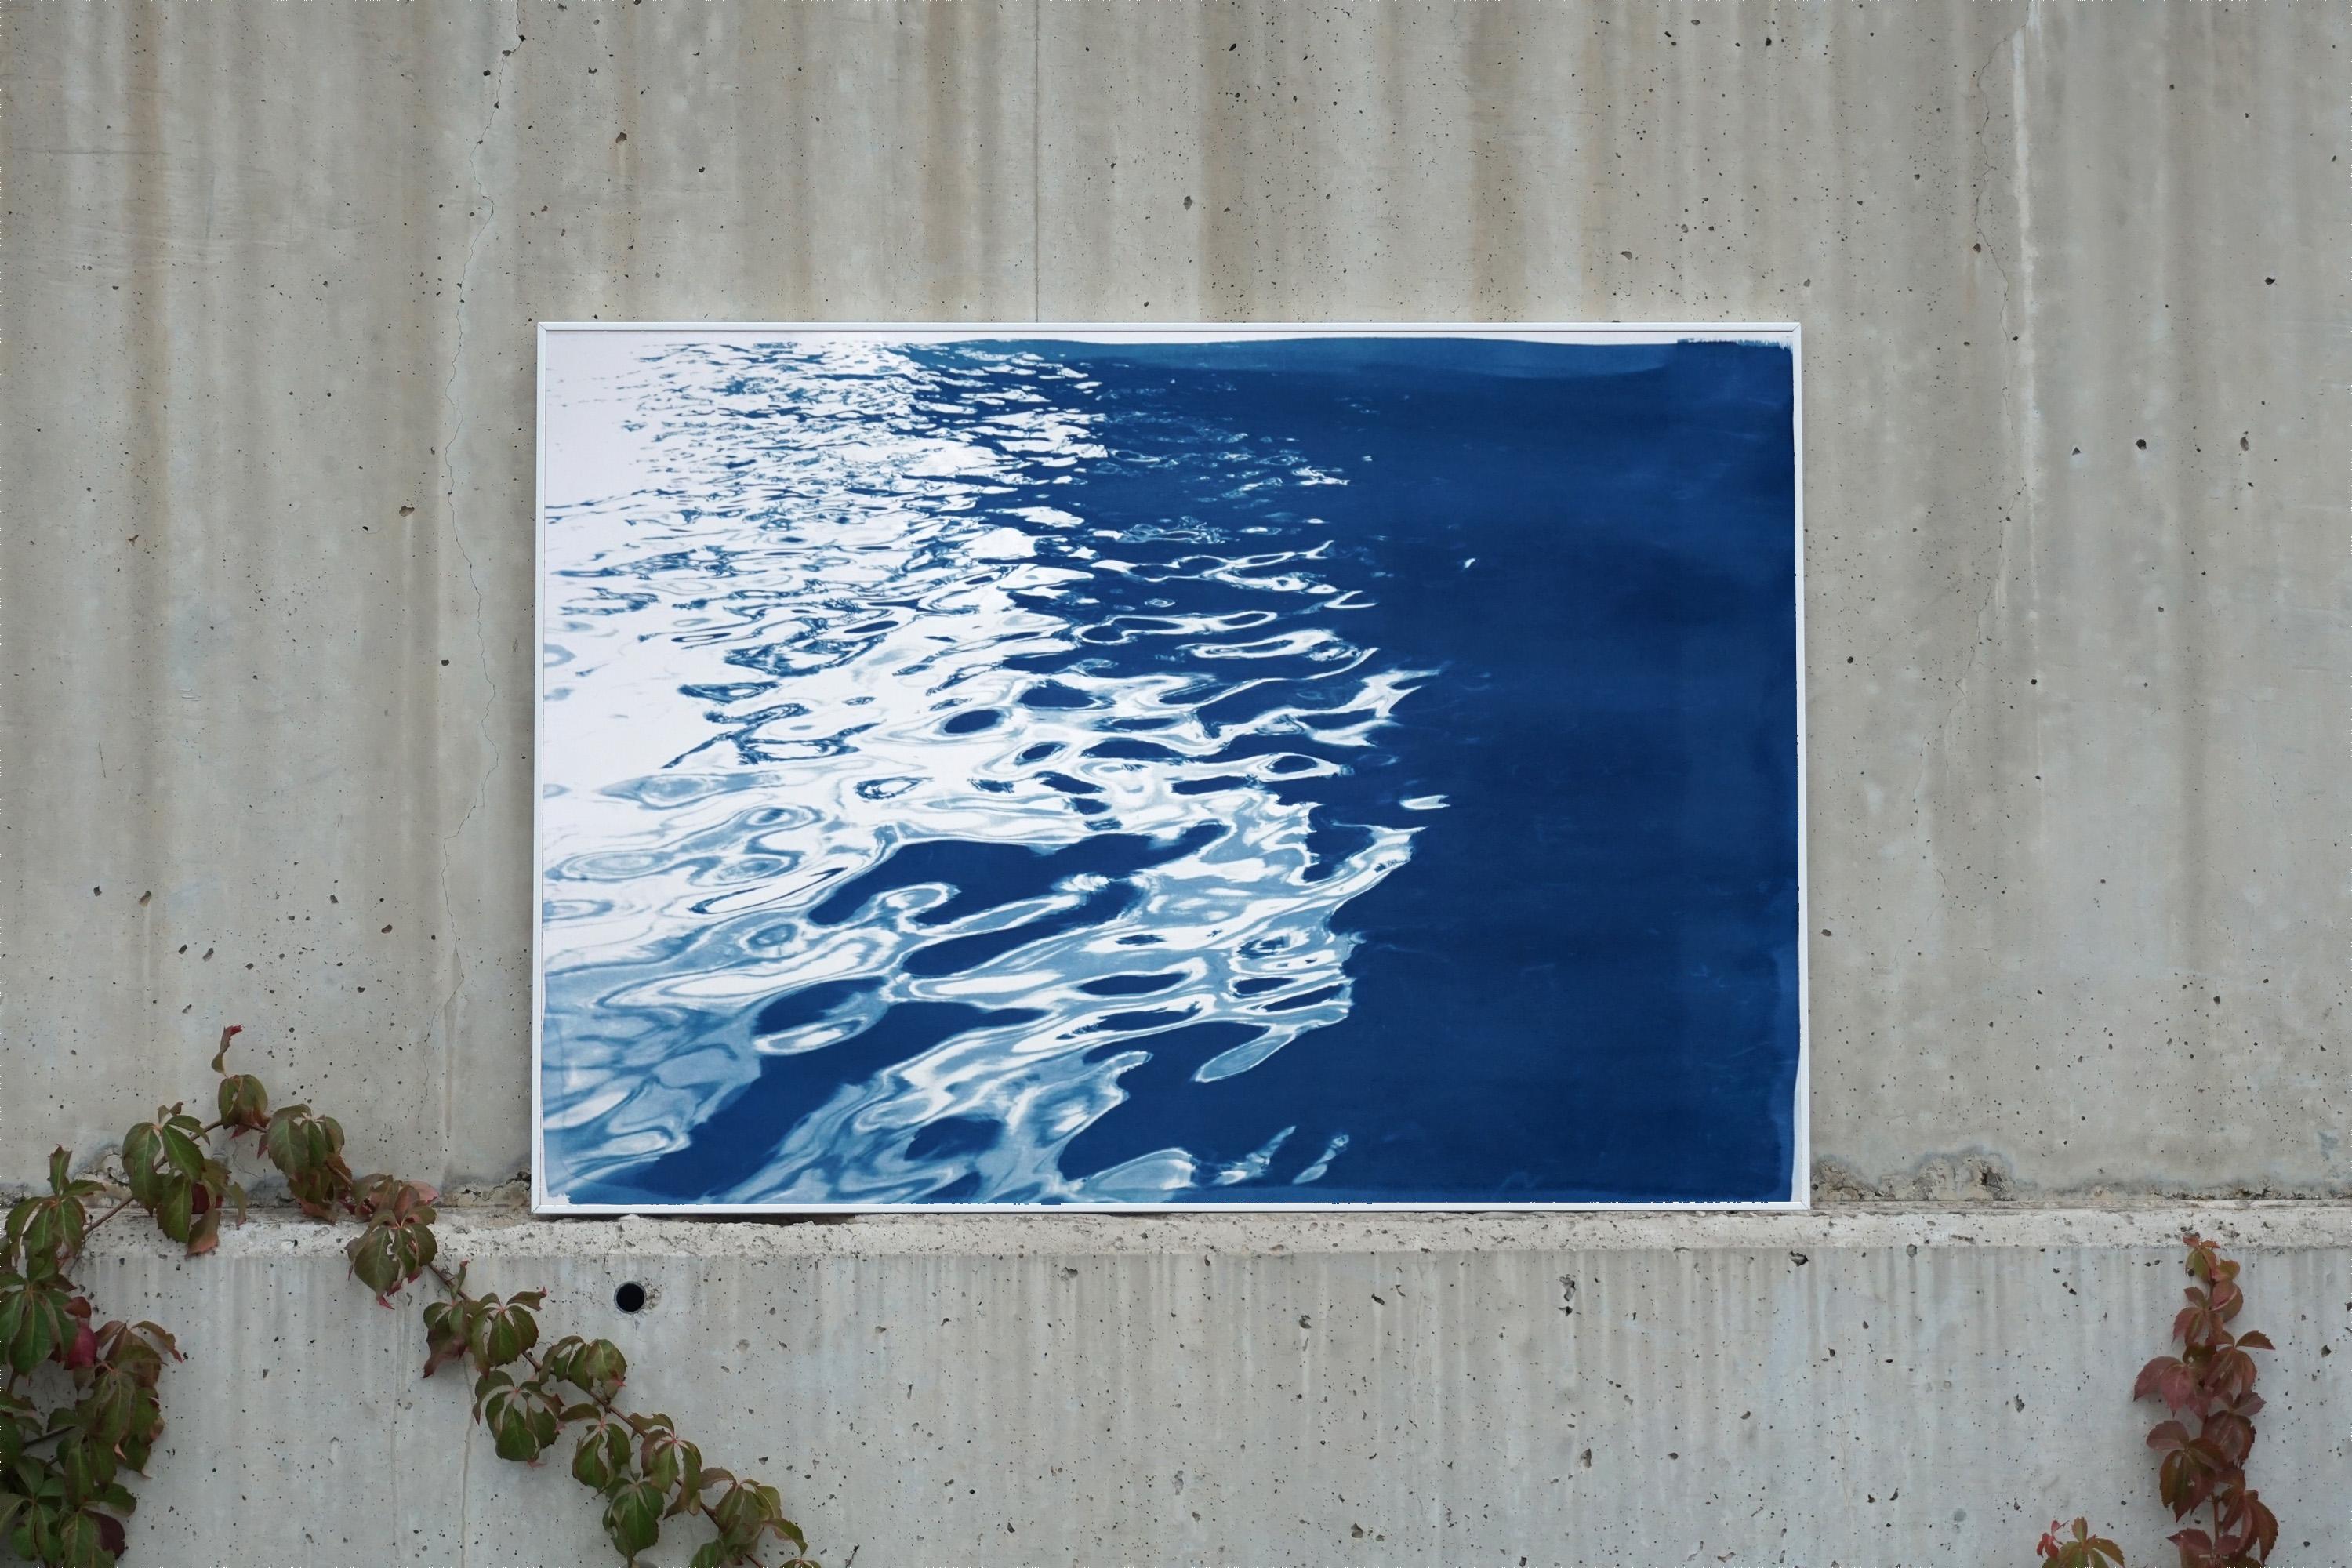 Nocturnal Seascape, Black Sea, Nautical Cyanotype Print on Paper, Deep Navy Blue For Sale 6